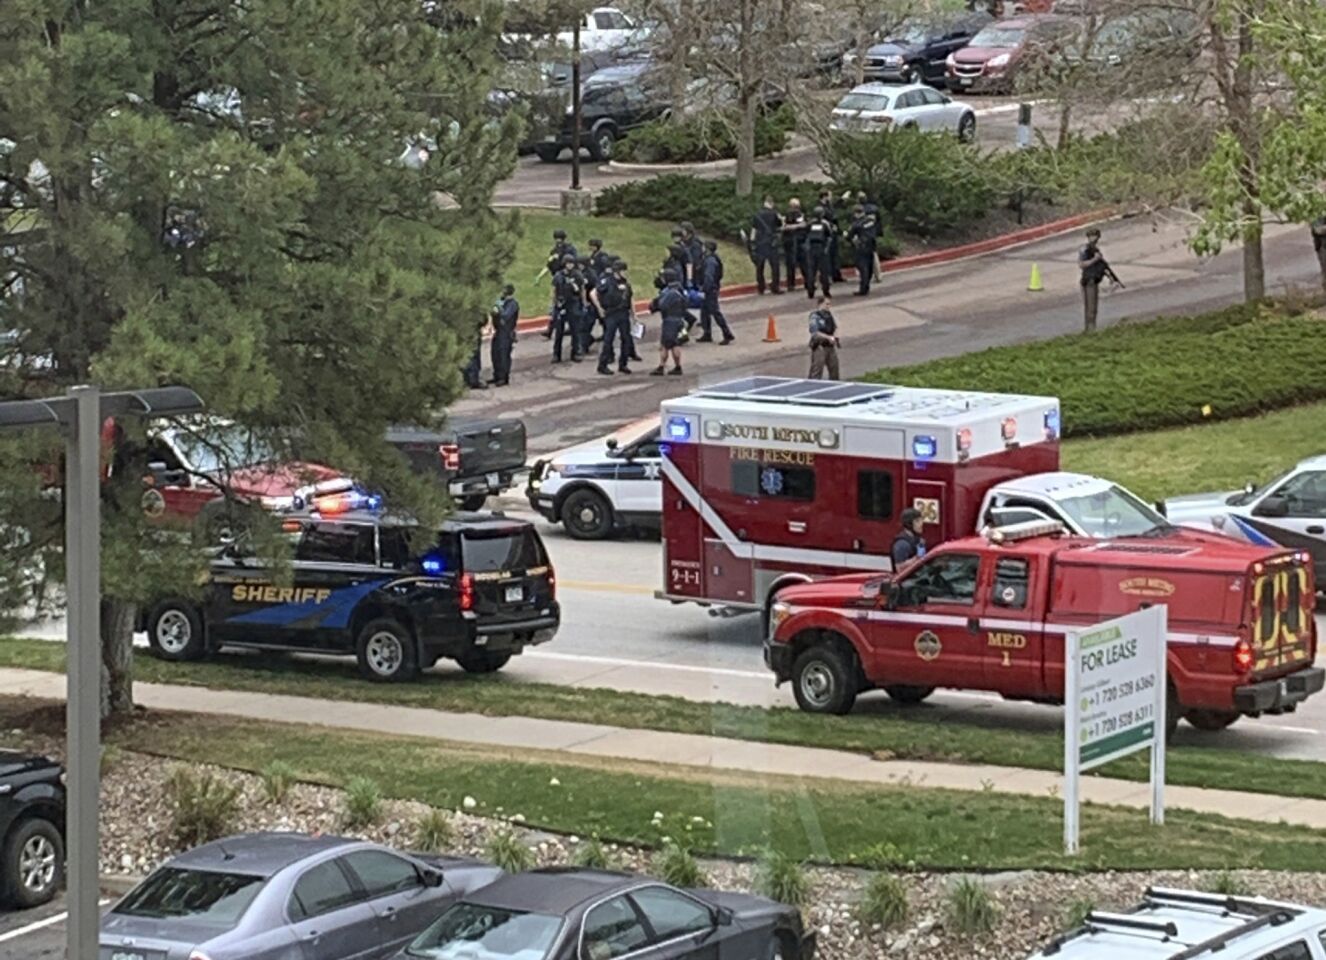 Armed police officers and others are seen outside STEM School Highlands Ranch, a charter middle school in the Denver suburb of Highlands Ranch, Colo., after a shooting Tuesday, May 7, 2019.